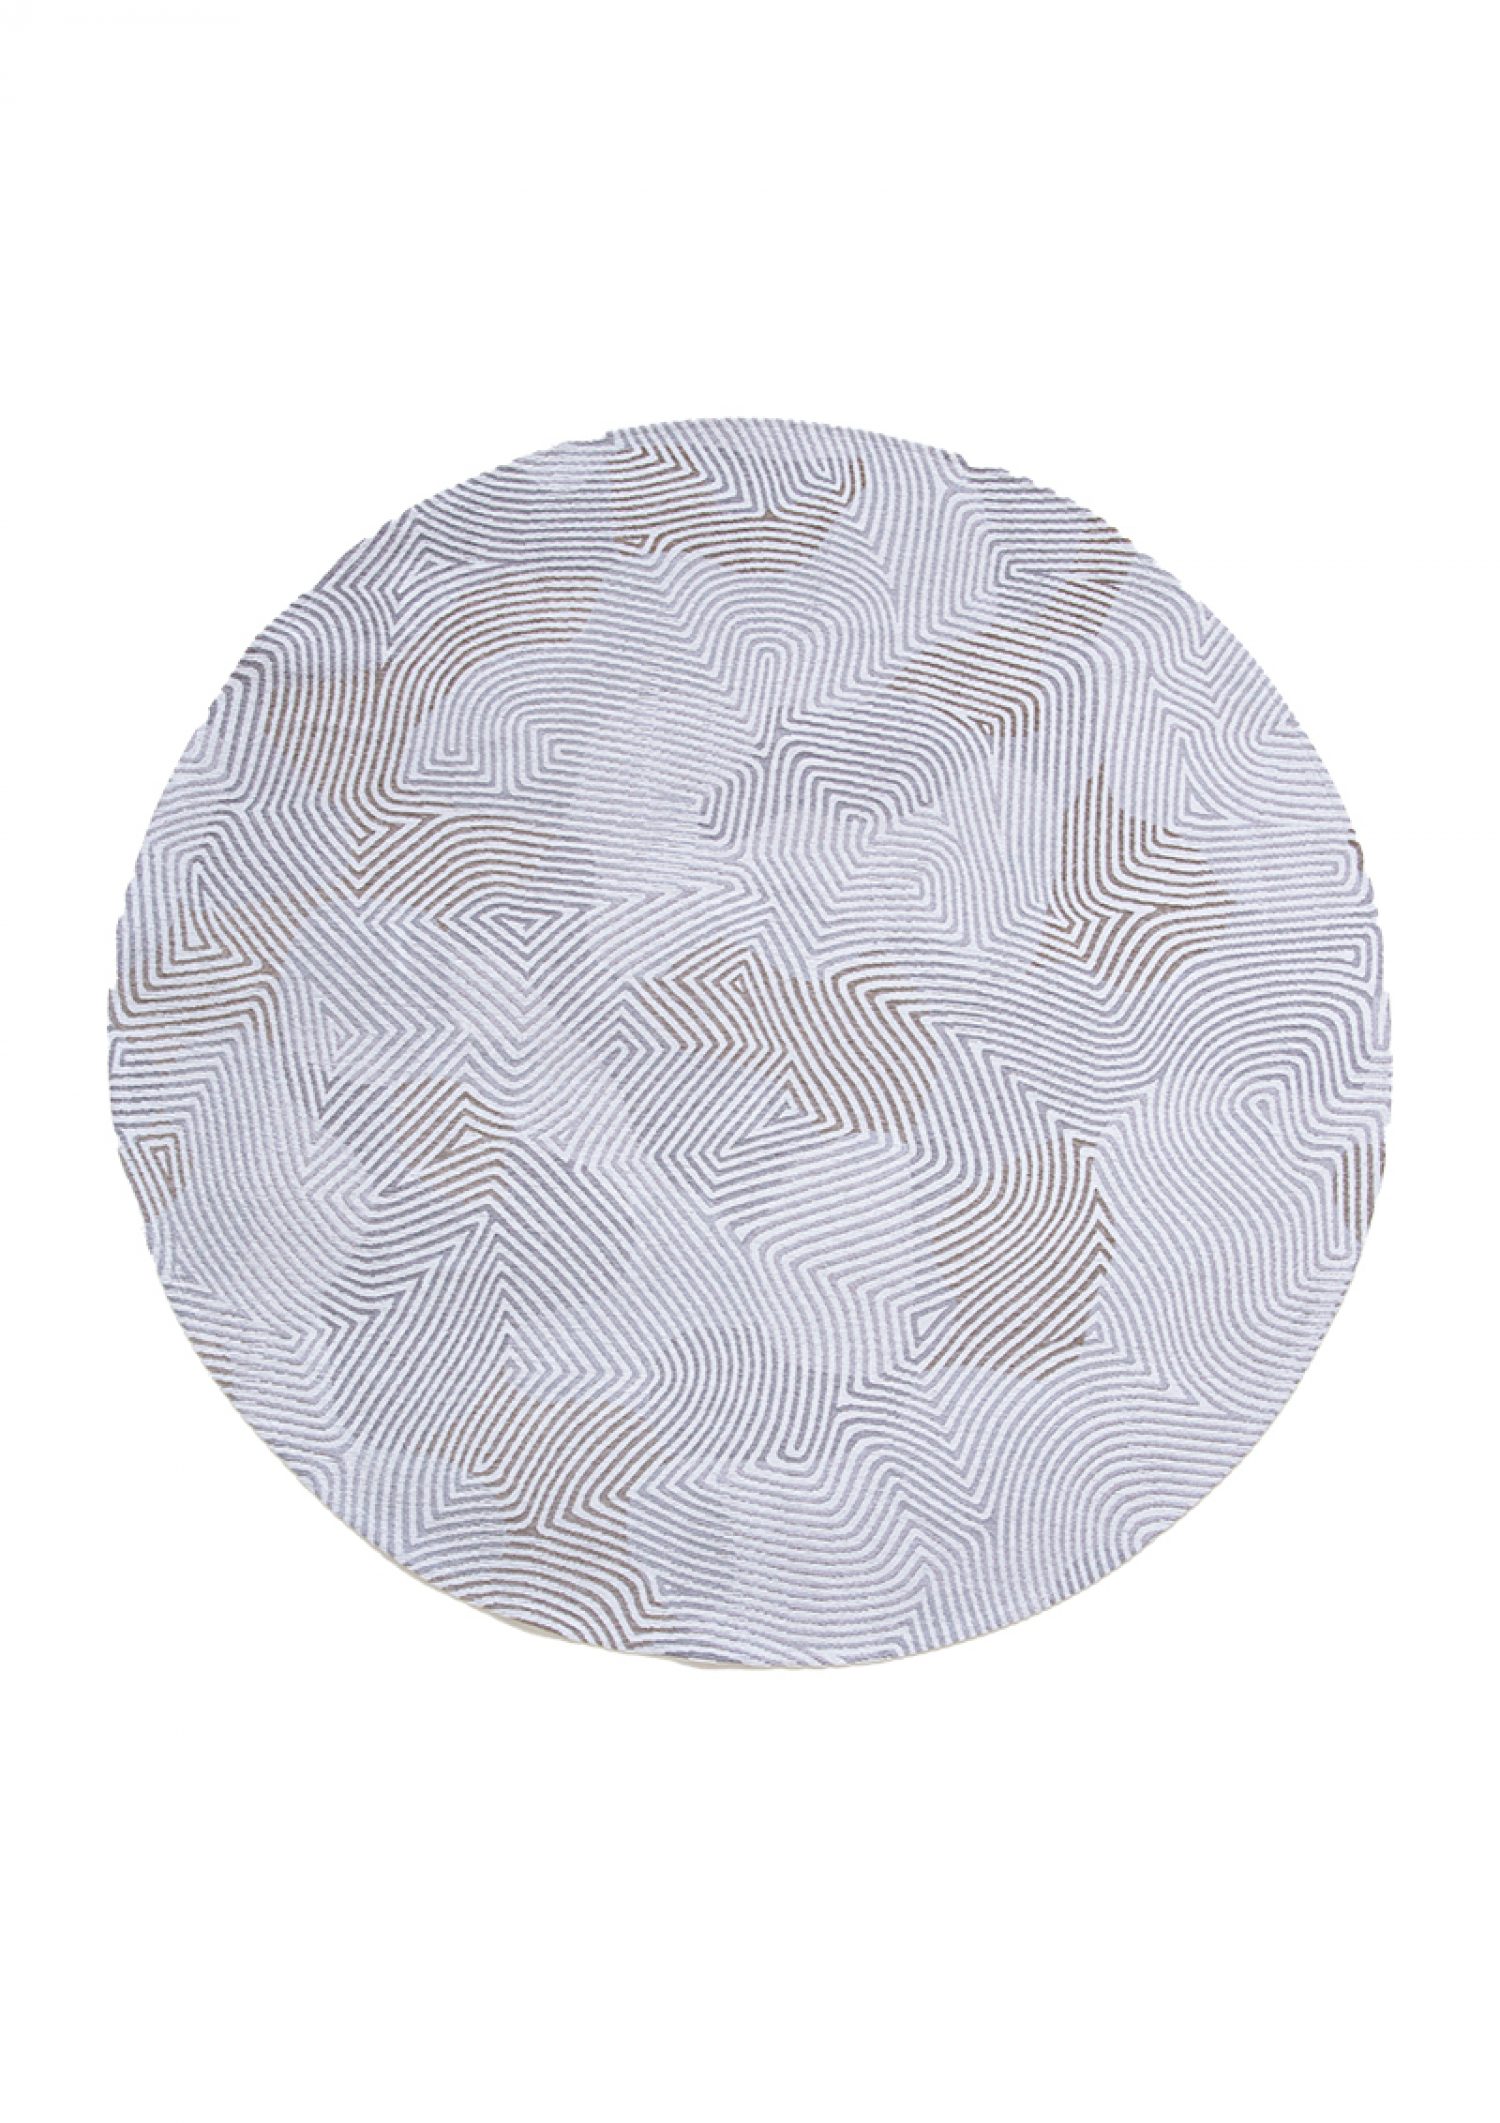 Meditation Collection - Oyster White Circular 9228